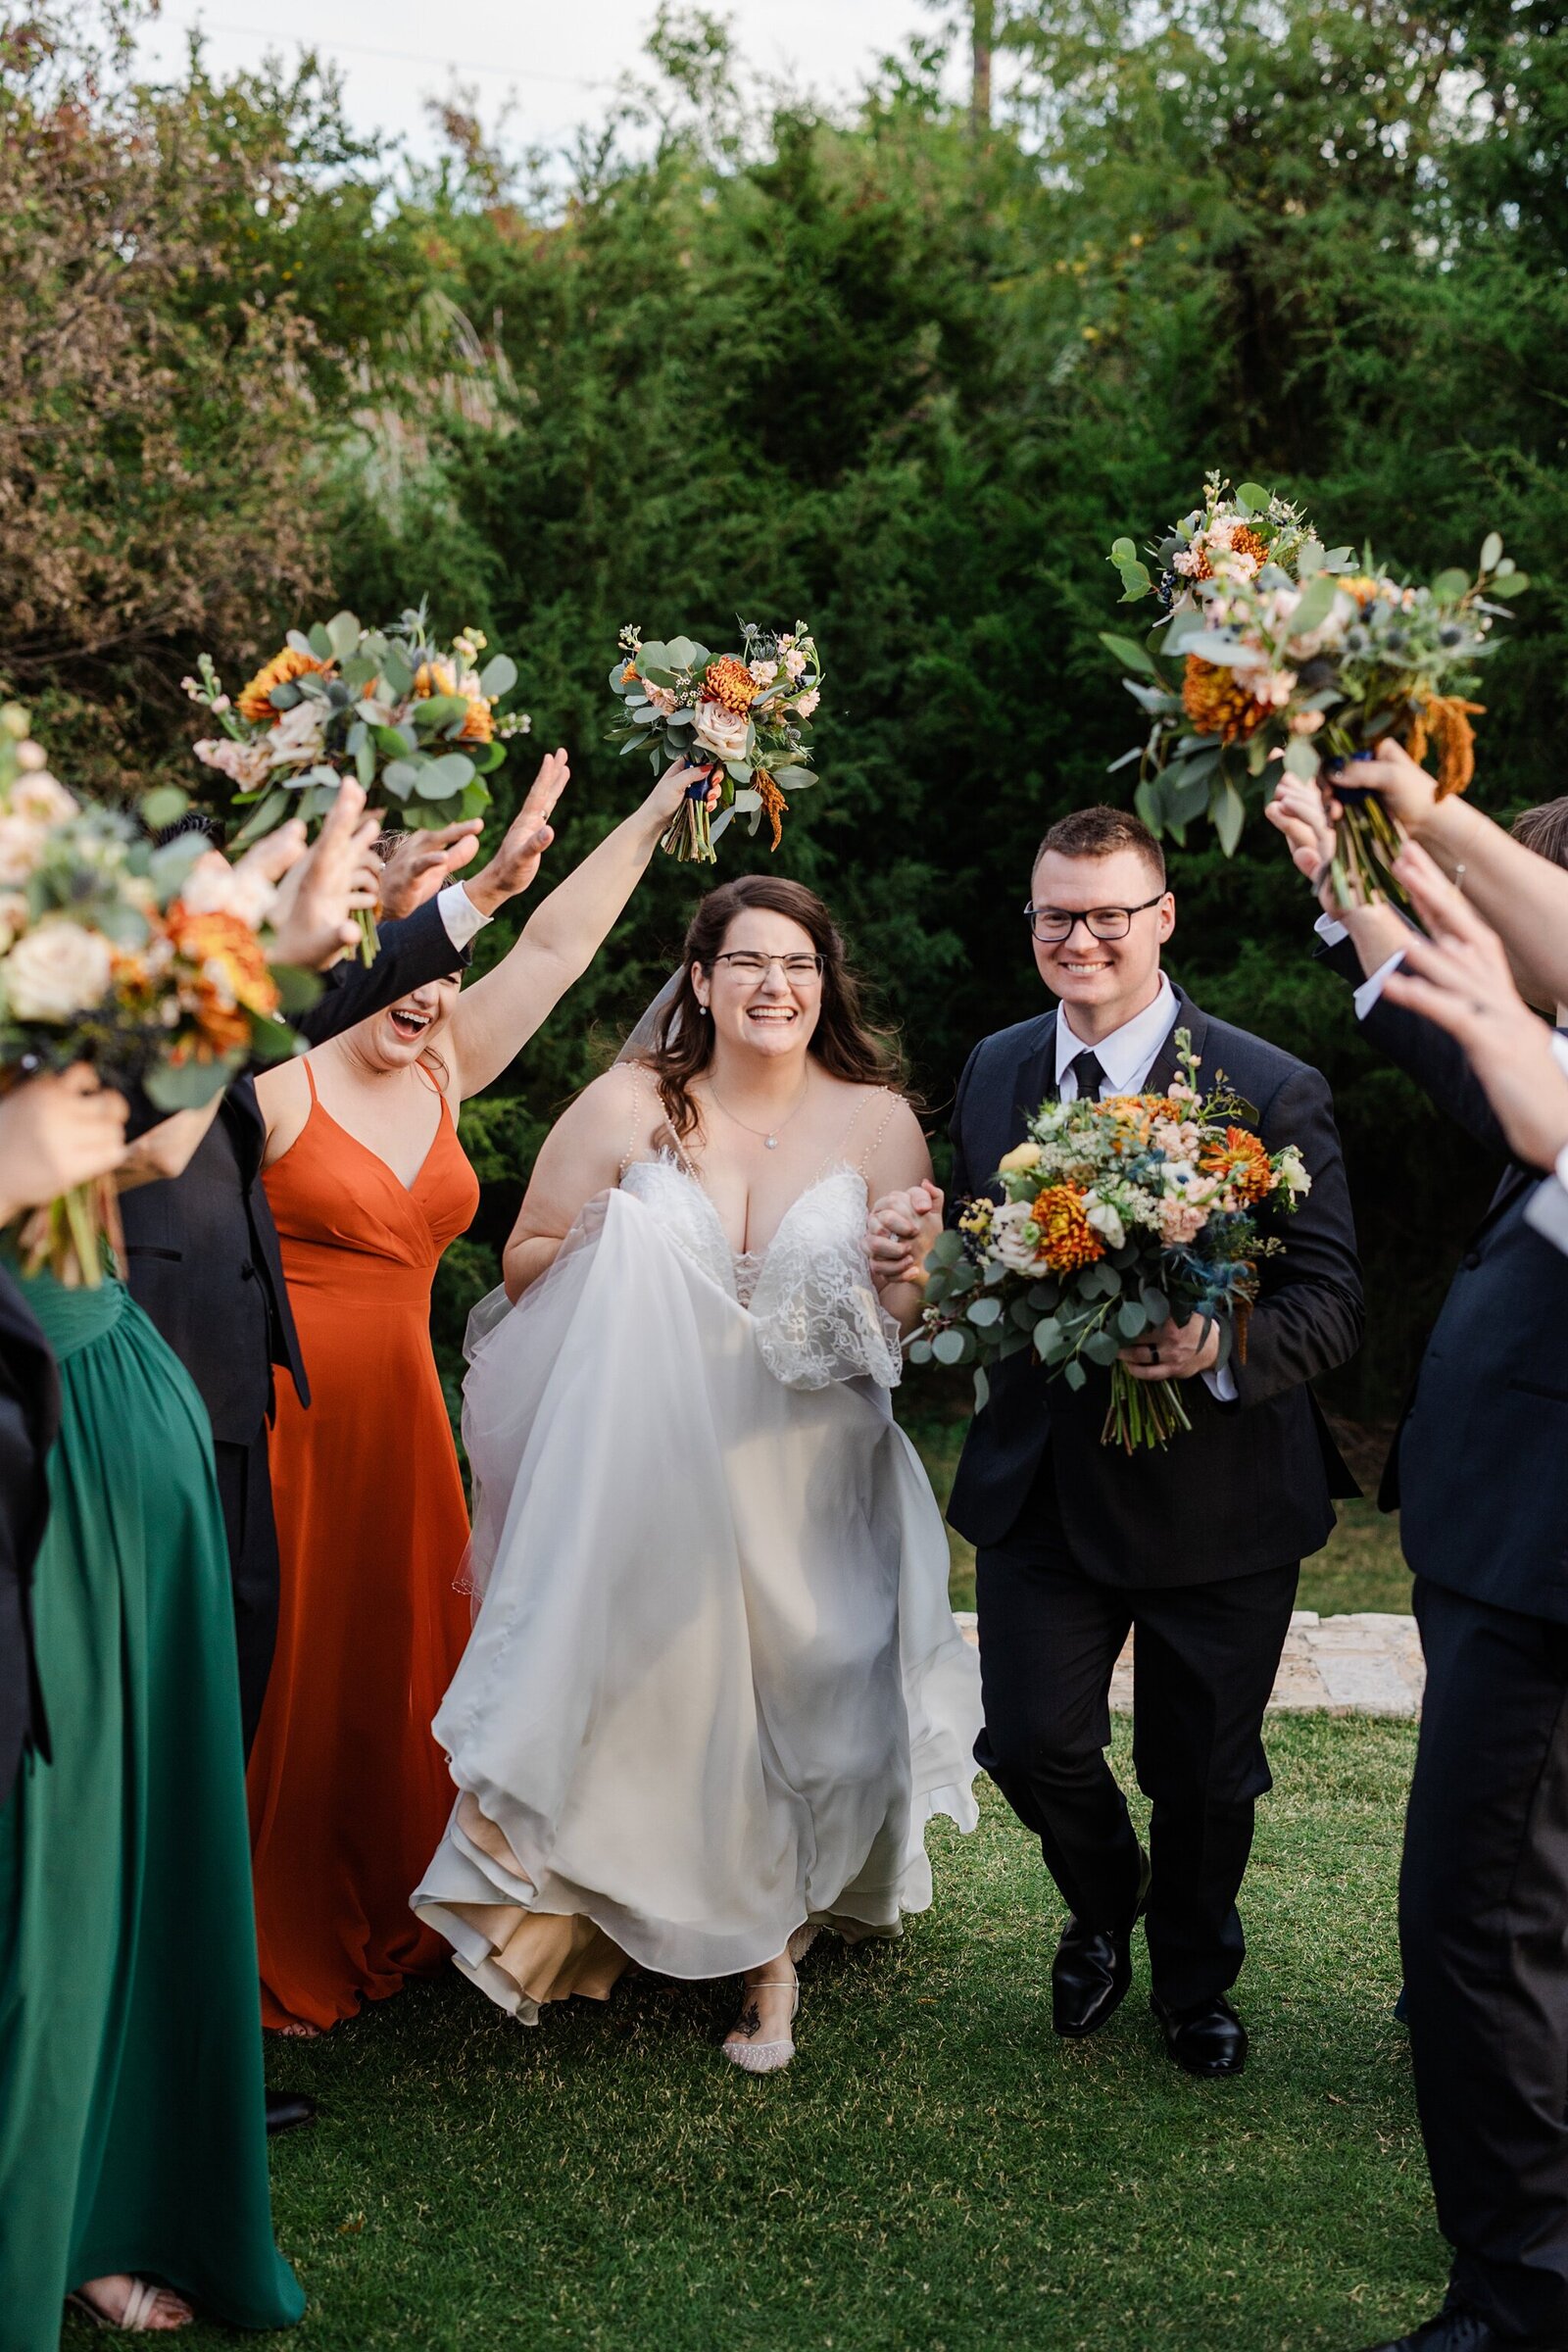 A couple laughing, holding hands, and walking towards the camera as they are surrounded by their wedding party who are holding up their bouquets at The Laurel in Grapevine, Texas. The bride is on the left is wearing a white dress and long flowing veil. The groom is on the right and is wearing a dark suit and is holding the bride's bouquet.